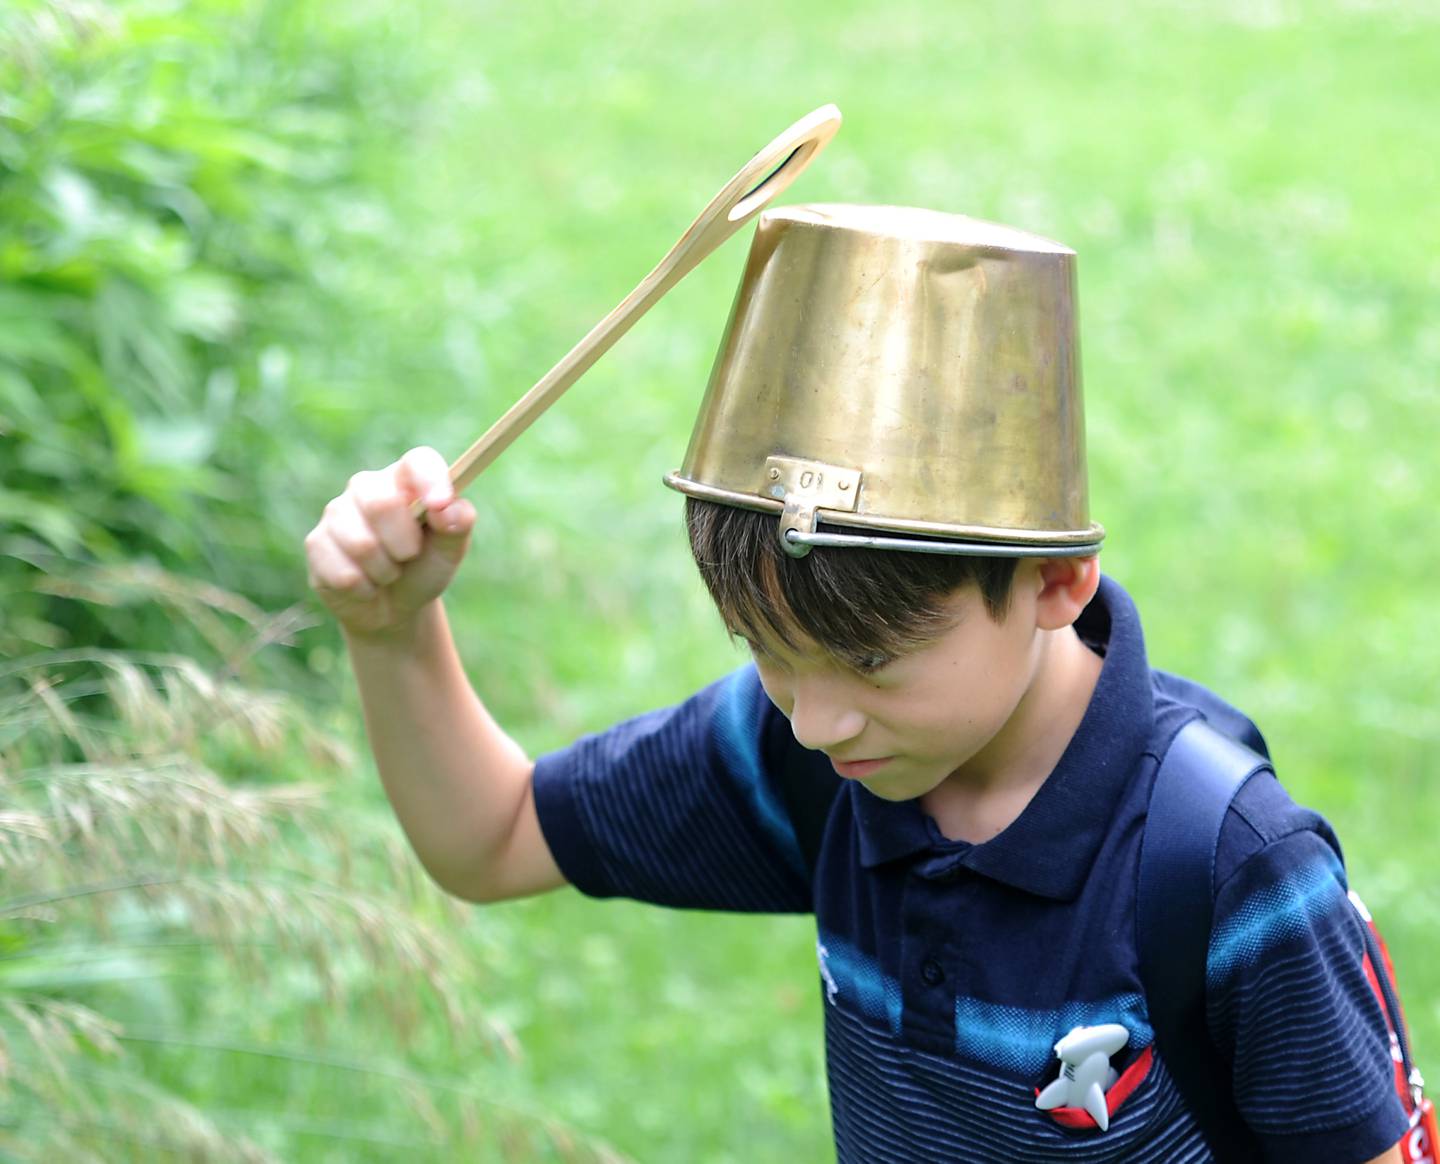 Josthin Meiga, 8, bangs the makeshift drum on his head as children from Youth and Family Center of McHenry County summer camp program play the drums Wednesday, July 6, 2022, during a field trip to the Harrison Benwell Conservation Area, 7055 McCullom Lake Road in Wonder Lake. The Youth and Family Center of McHenry County is hiring a social worker to assist with the mental health needs of those they help. The nonprofit is one of three receiving funds through United Way of Greater McHenry County as part of an Advance McHenry County grant.